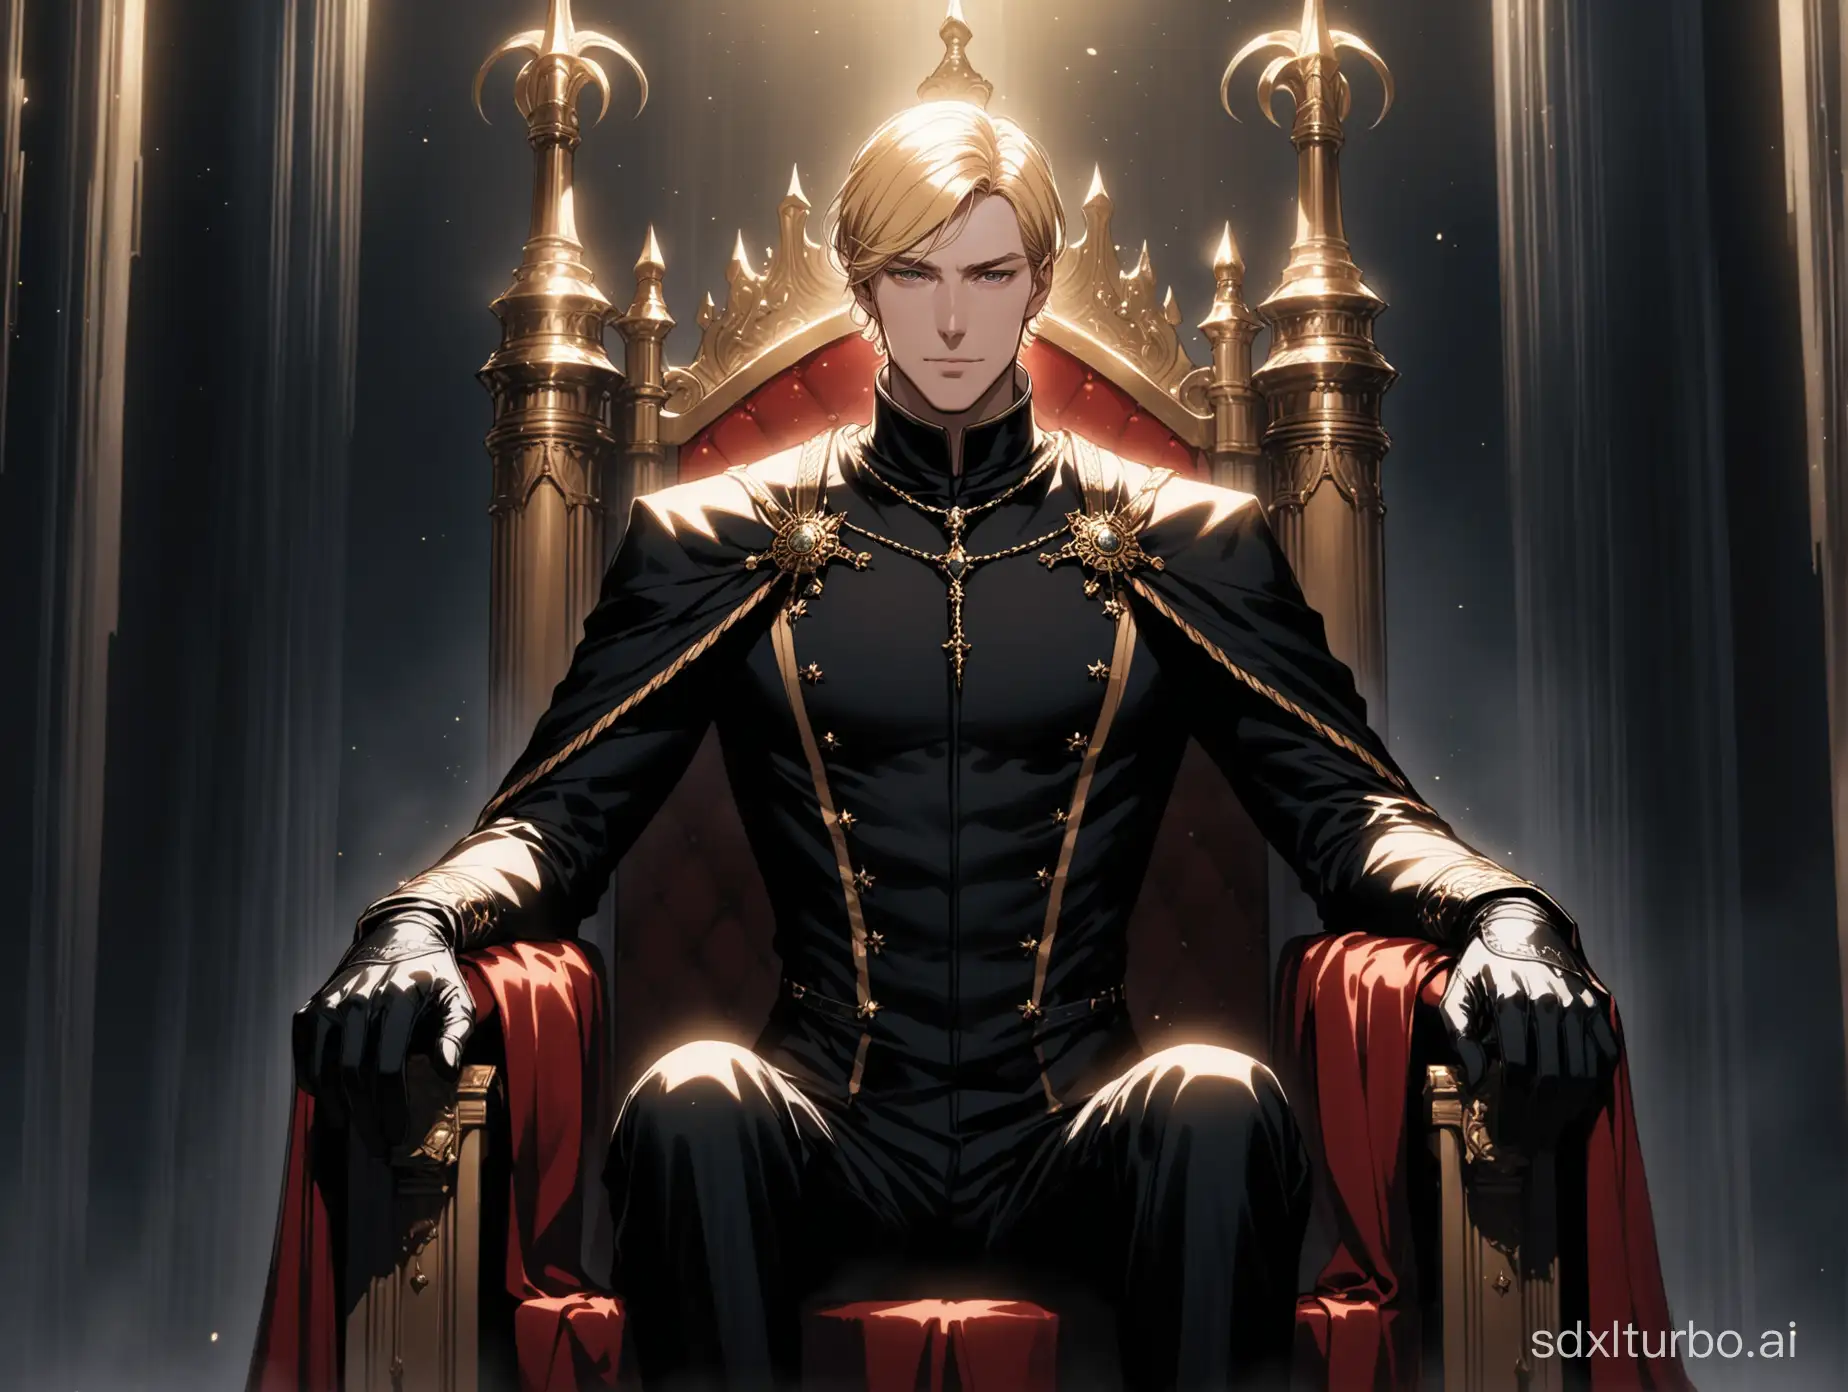 Tall man with short blond hair center parted with black gloves sitting on a throne